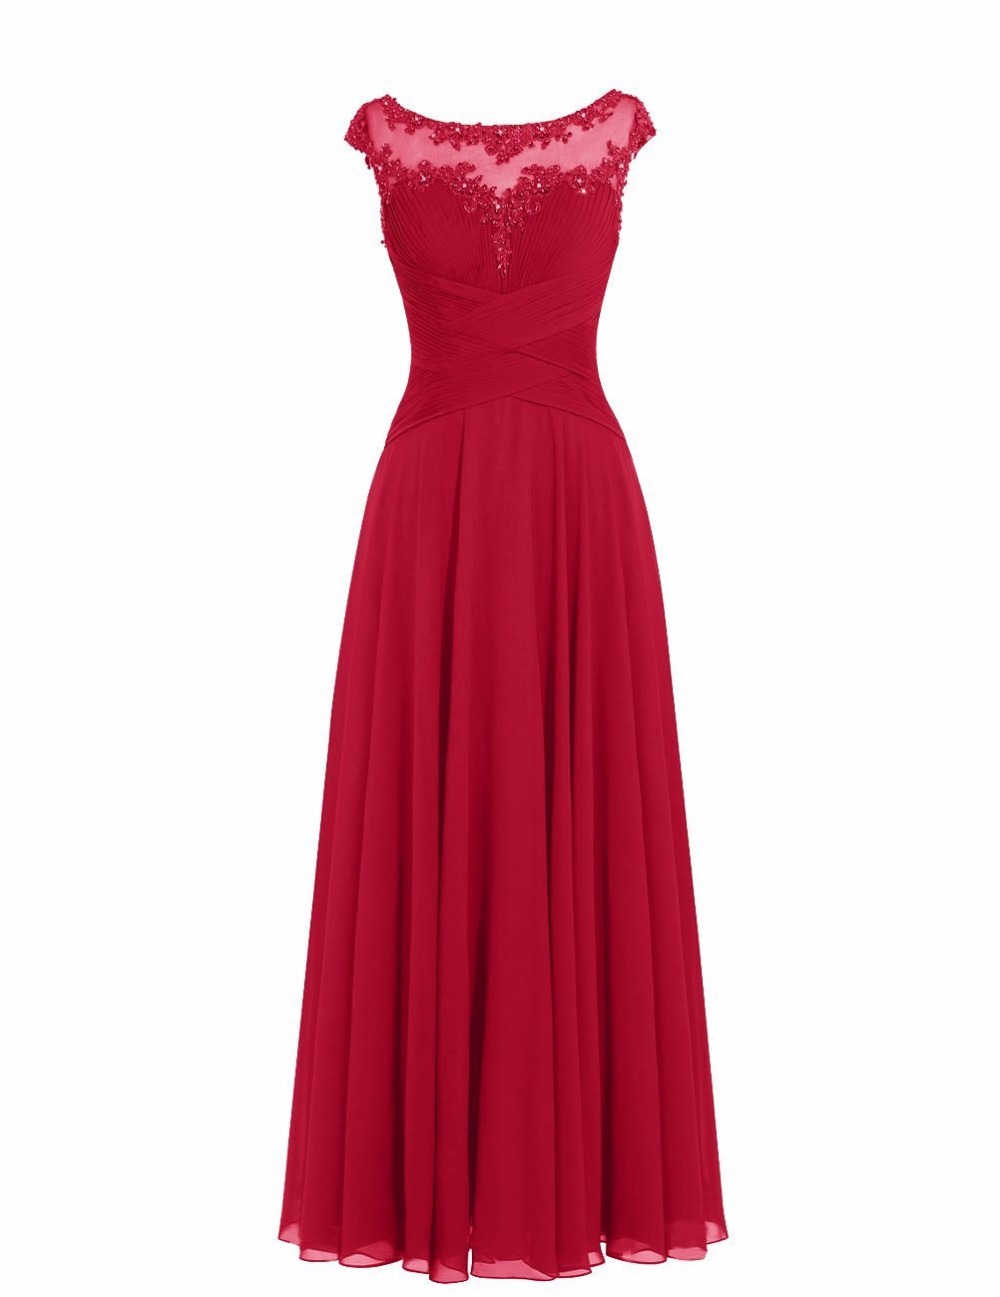 Women Sleveless Embroidered Chiffon Bridesmaid Dress Long Party Pageant Wedding Formal Dress - Wine Red